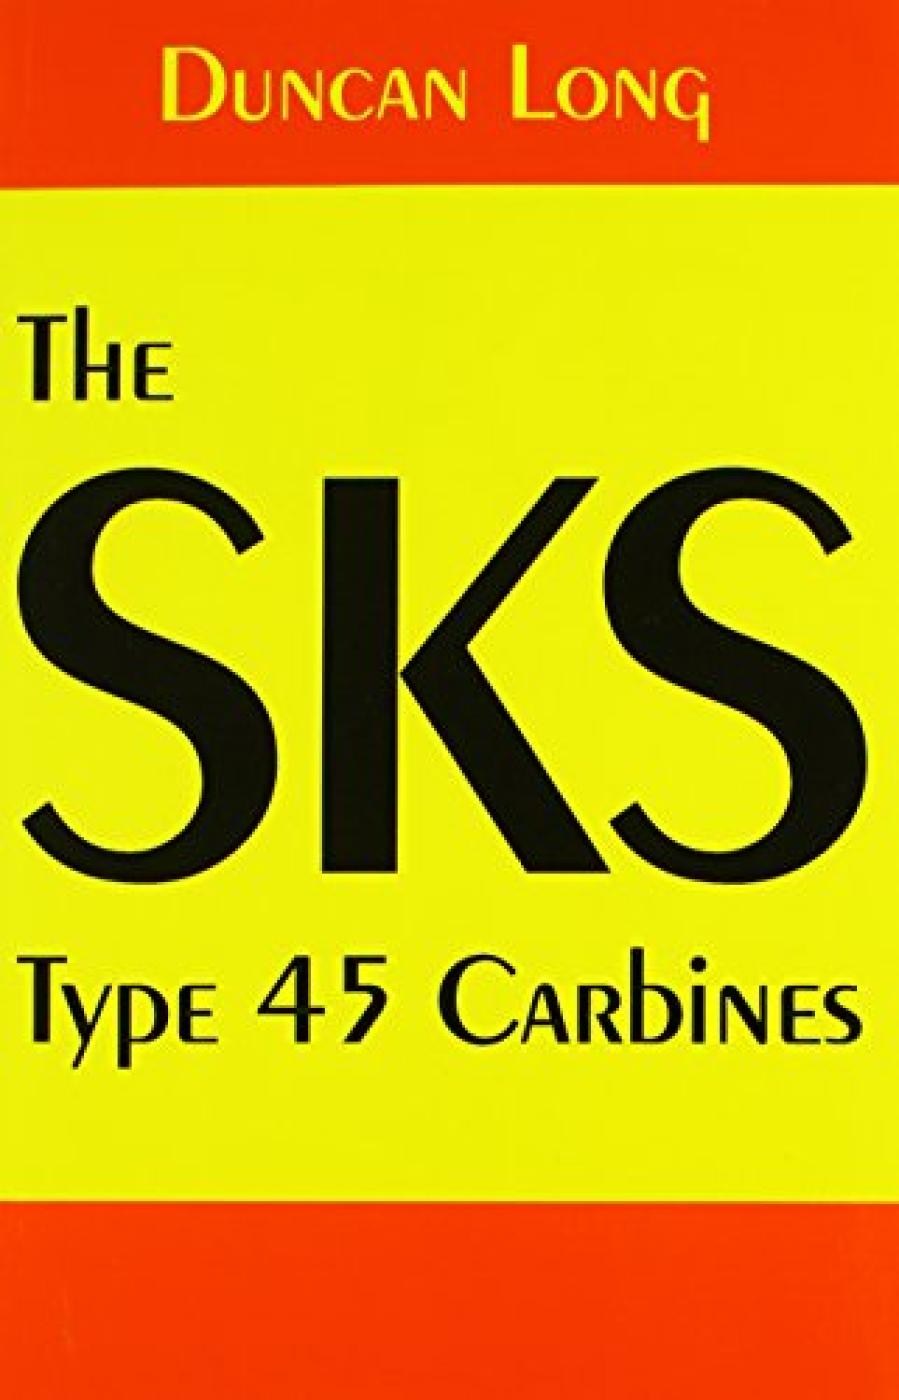 The SKS Type 45 Carbines